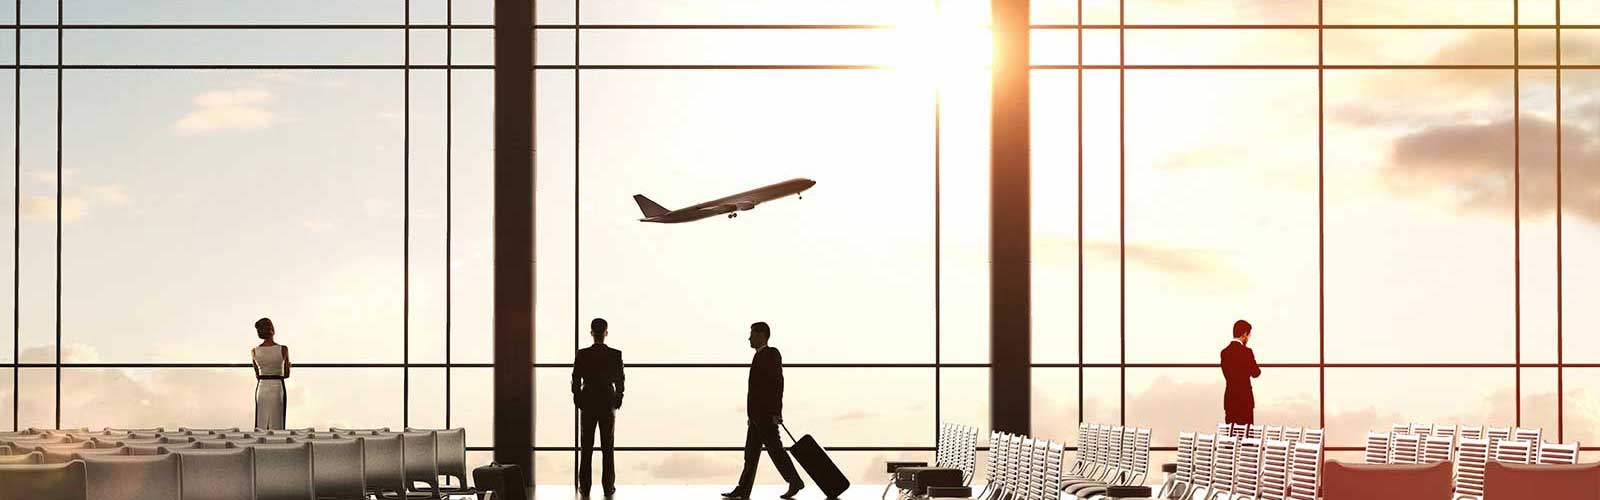 Smooth operating airport backed by a custom travel software solution